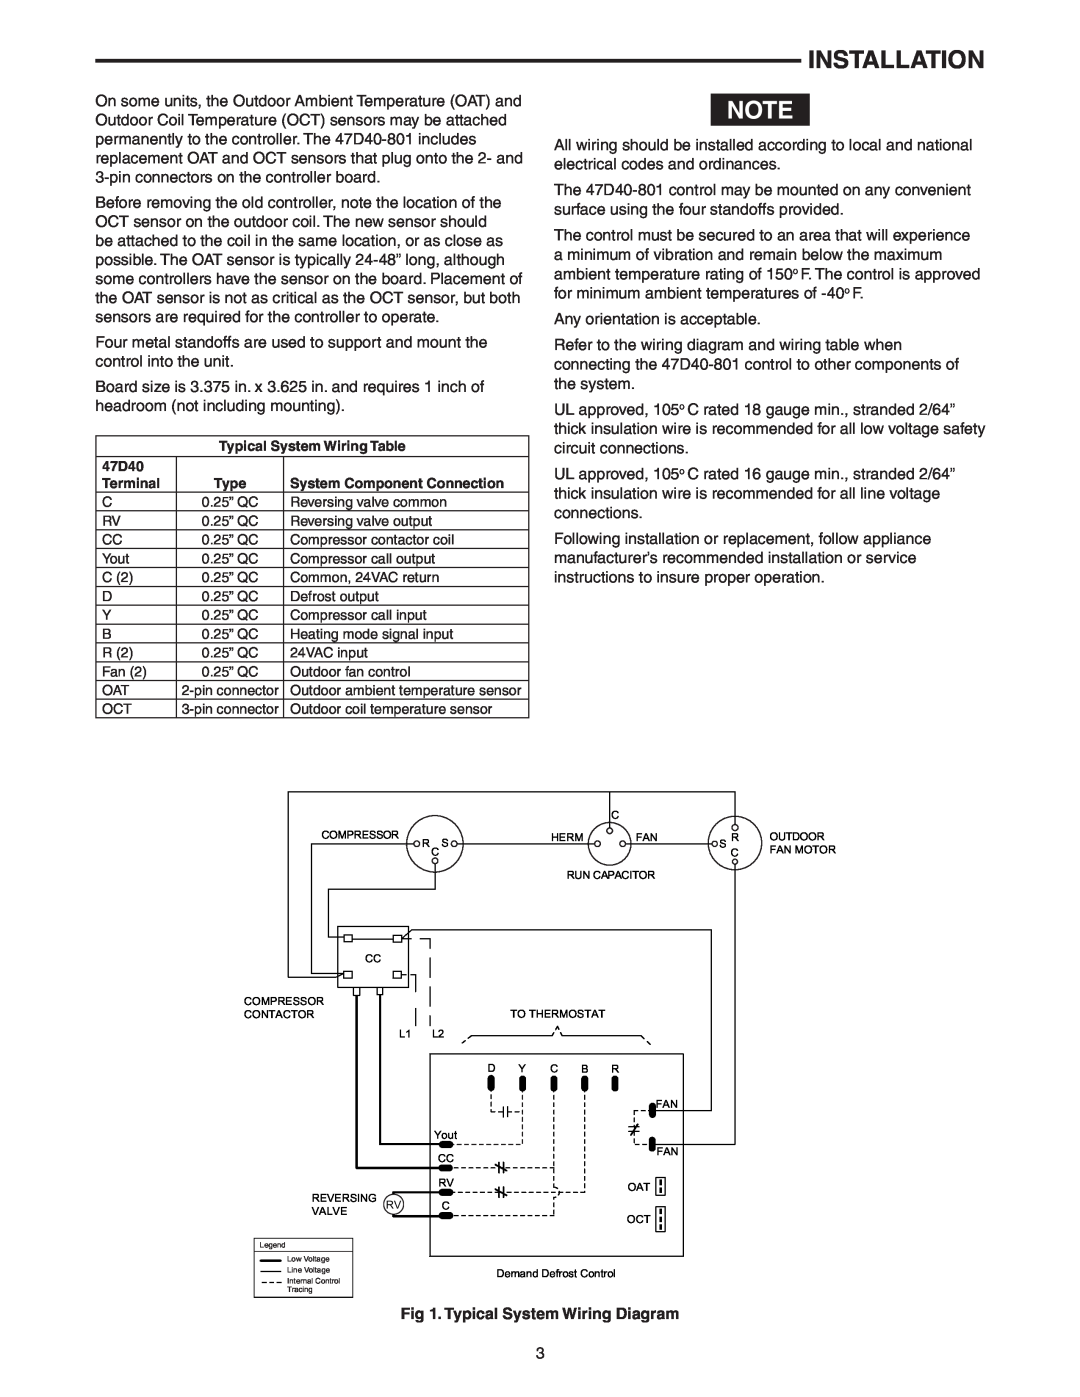 White Rodgers 47D40-801 installation instructions Installation, Typical System Wiring Diagram 